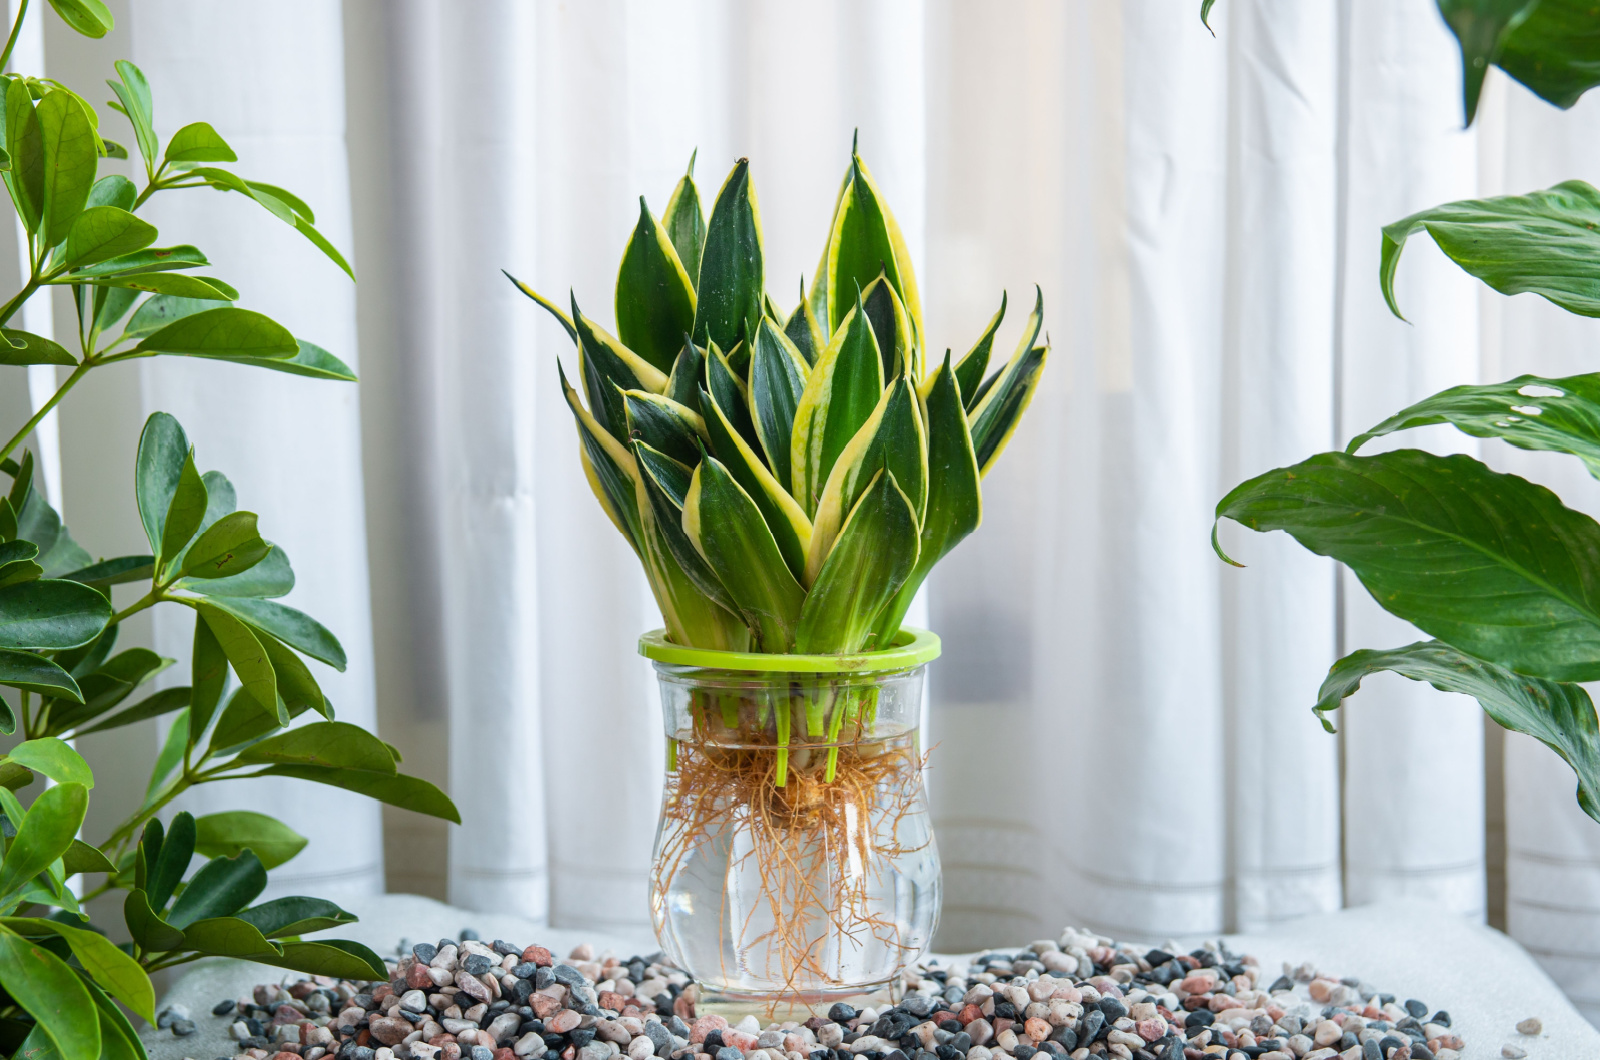 snake plant with roots in a glass jar